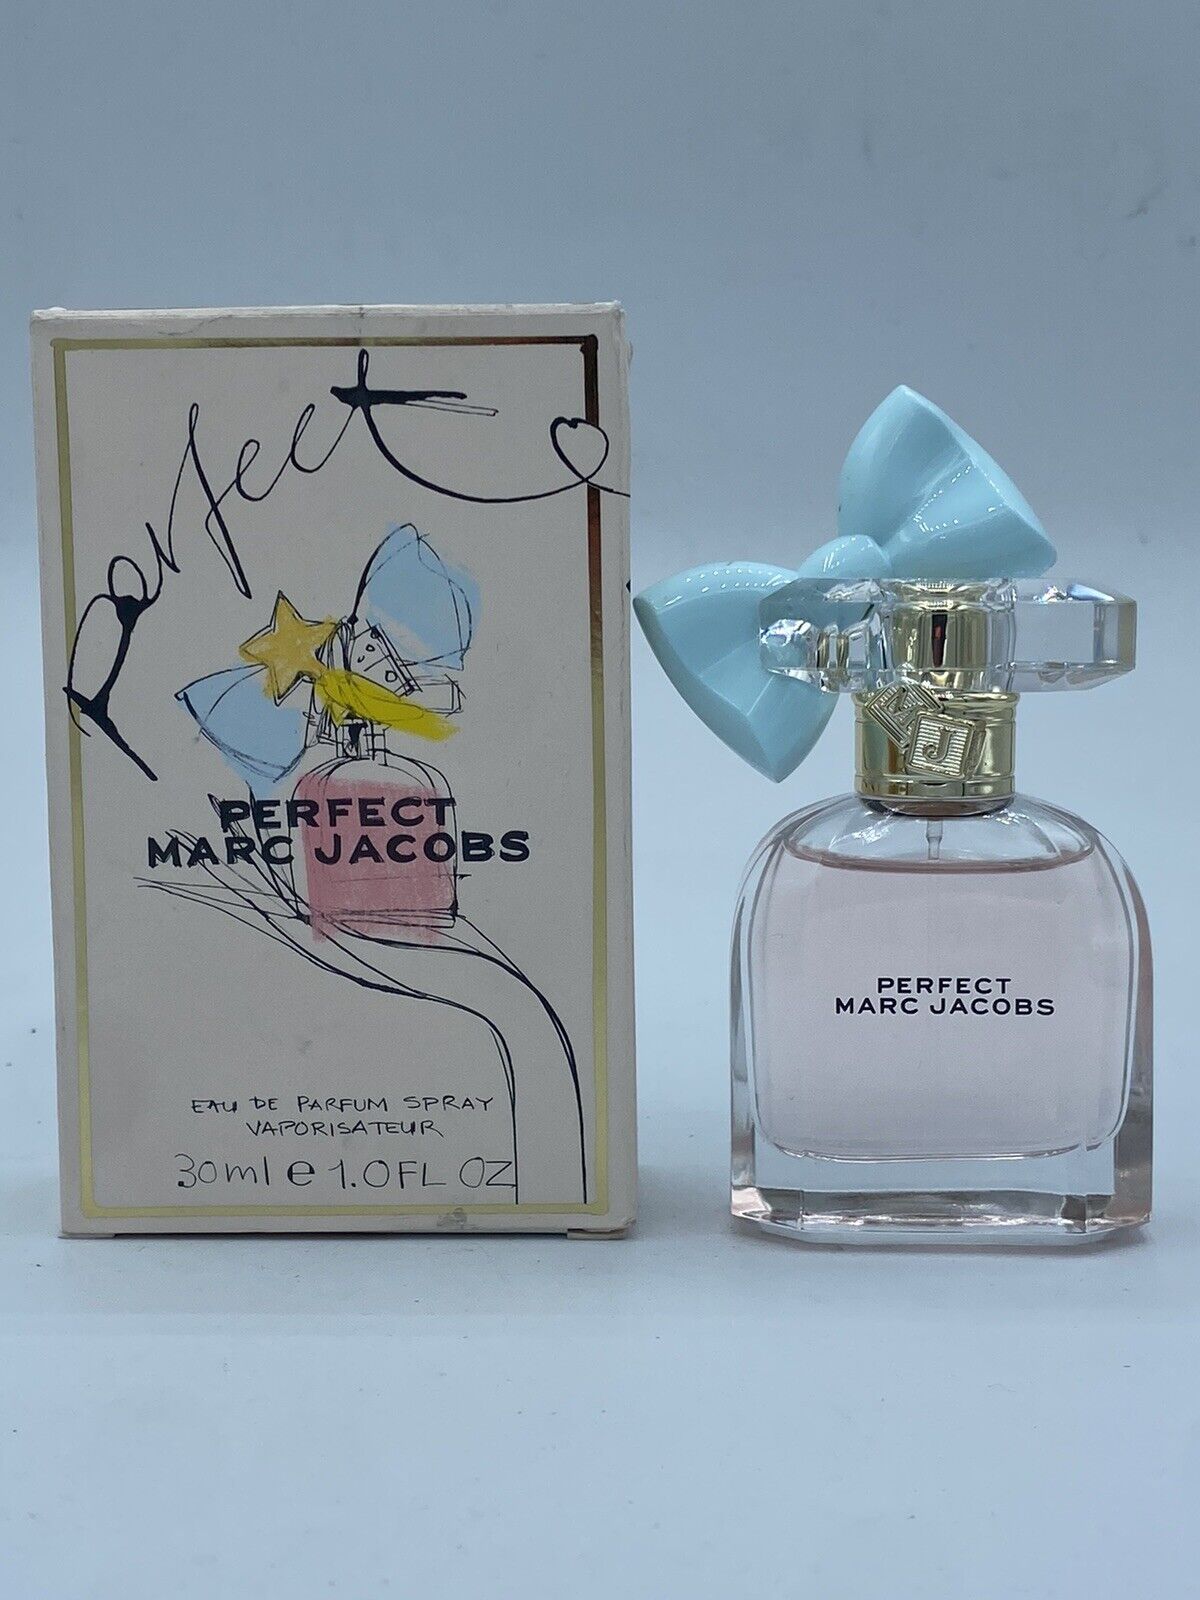 Marc Jacobs Women Perfect EDP Spray 1 Fl. oz. 30 Ml. About 95% Full *Authentic*.